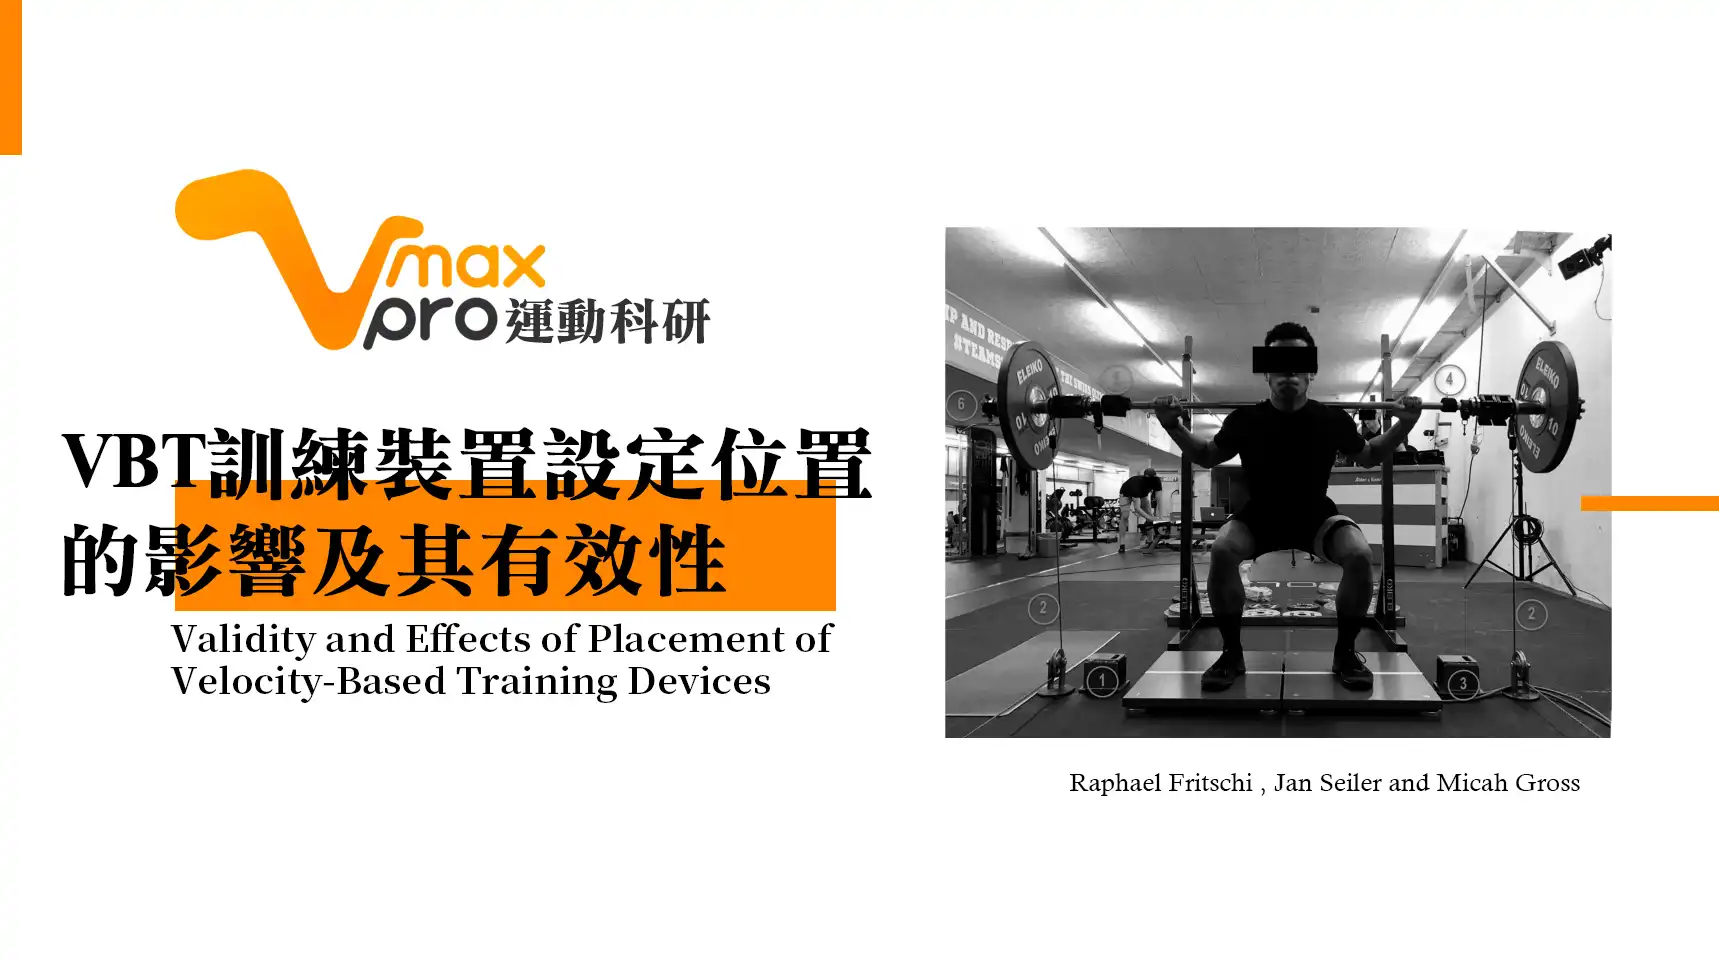 VBT訓練裝置設置的有效性及影響（一） | Validity and Effects of Placement of Velocity-Based Training Devices